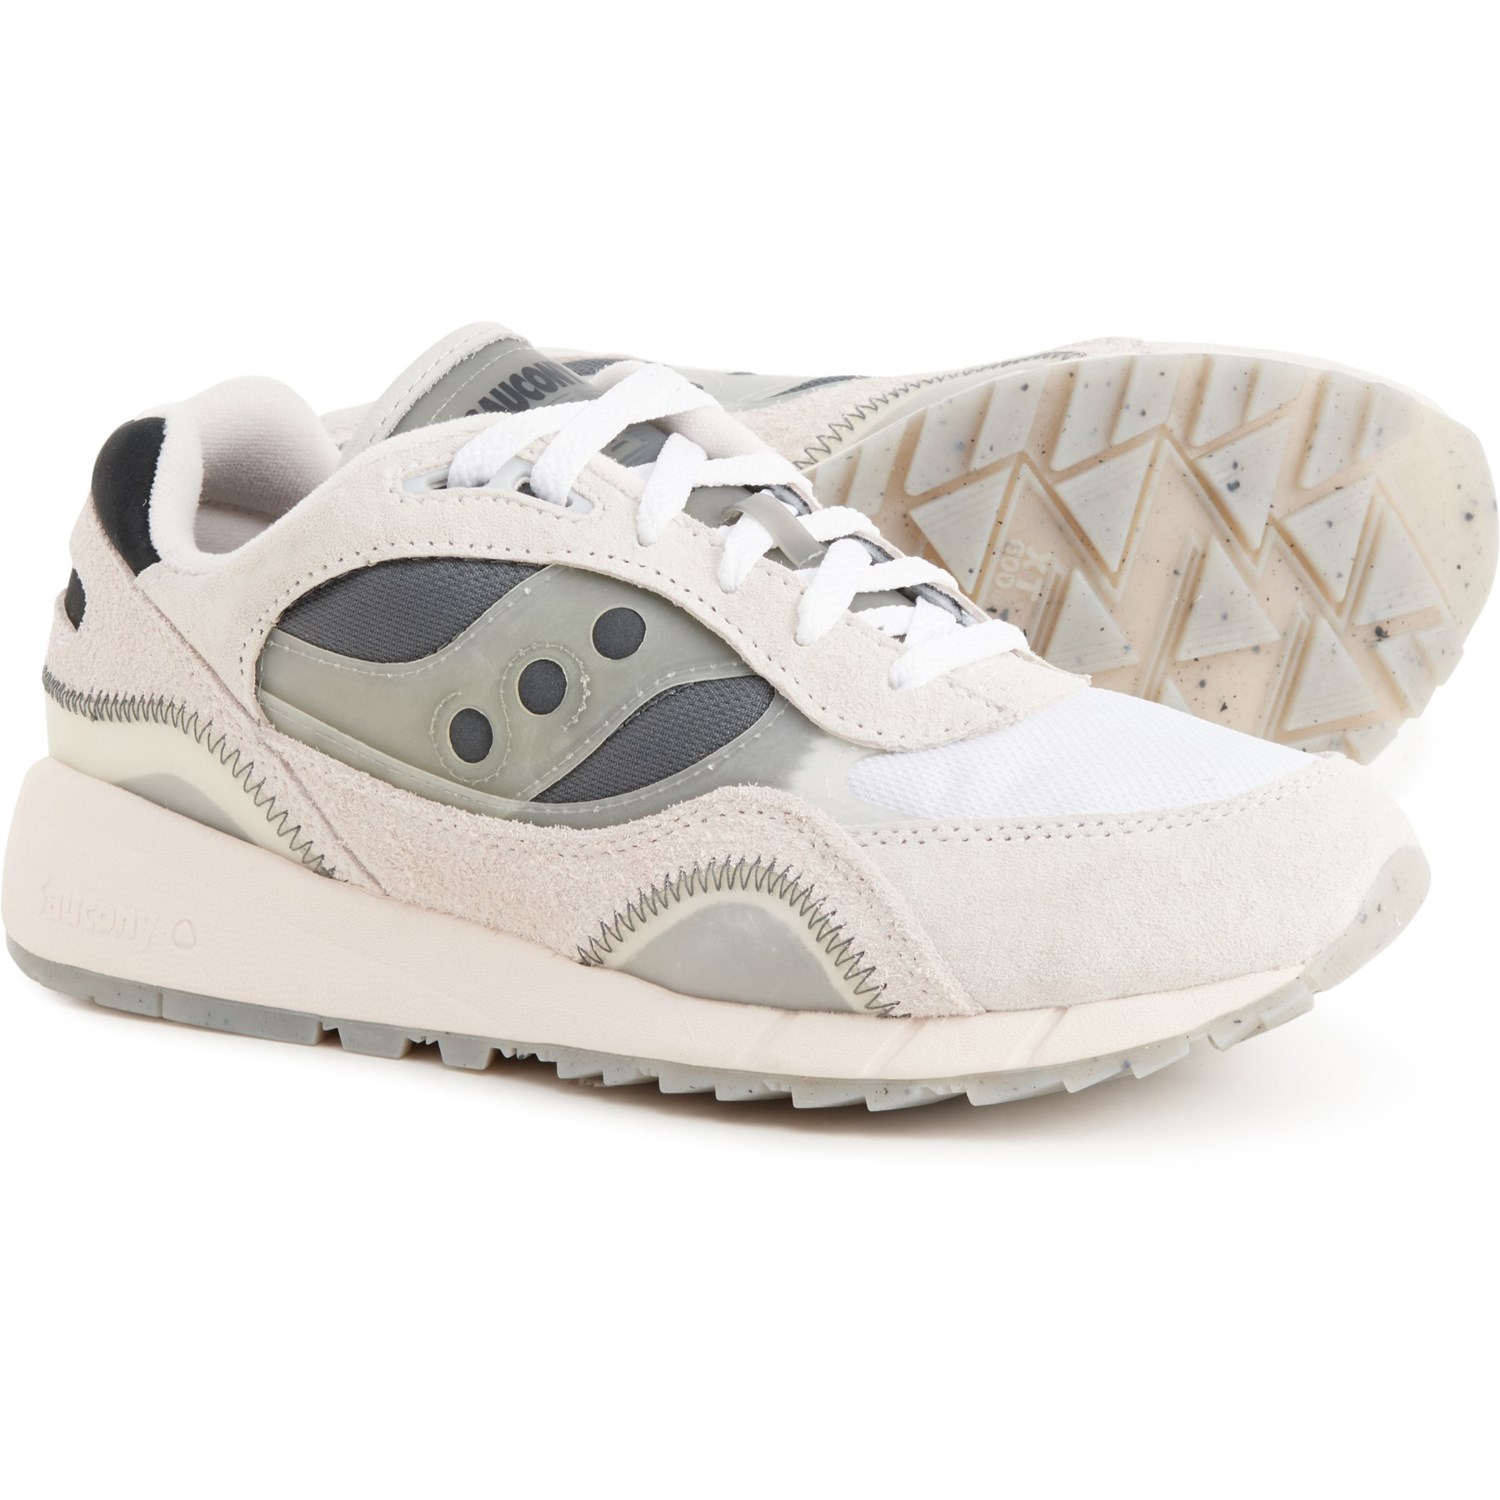 Saucony Fashion Running Shoes (For Men and Women)